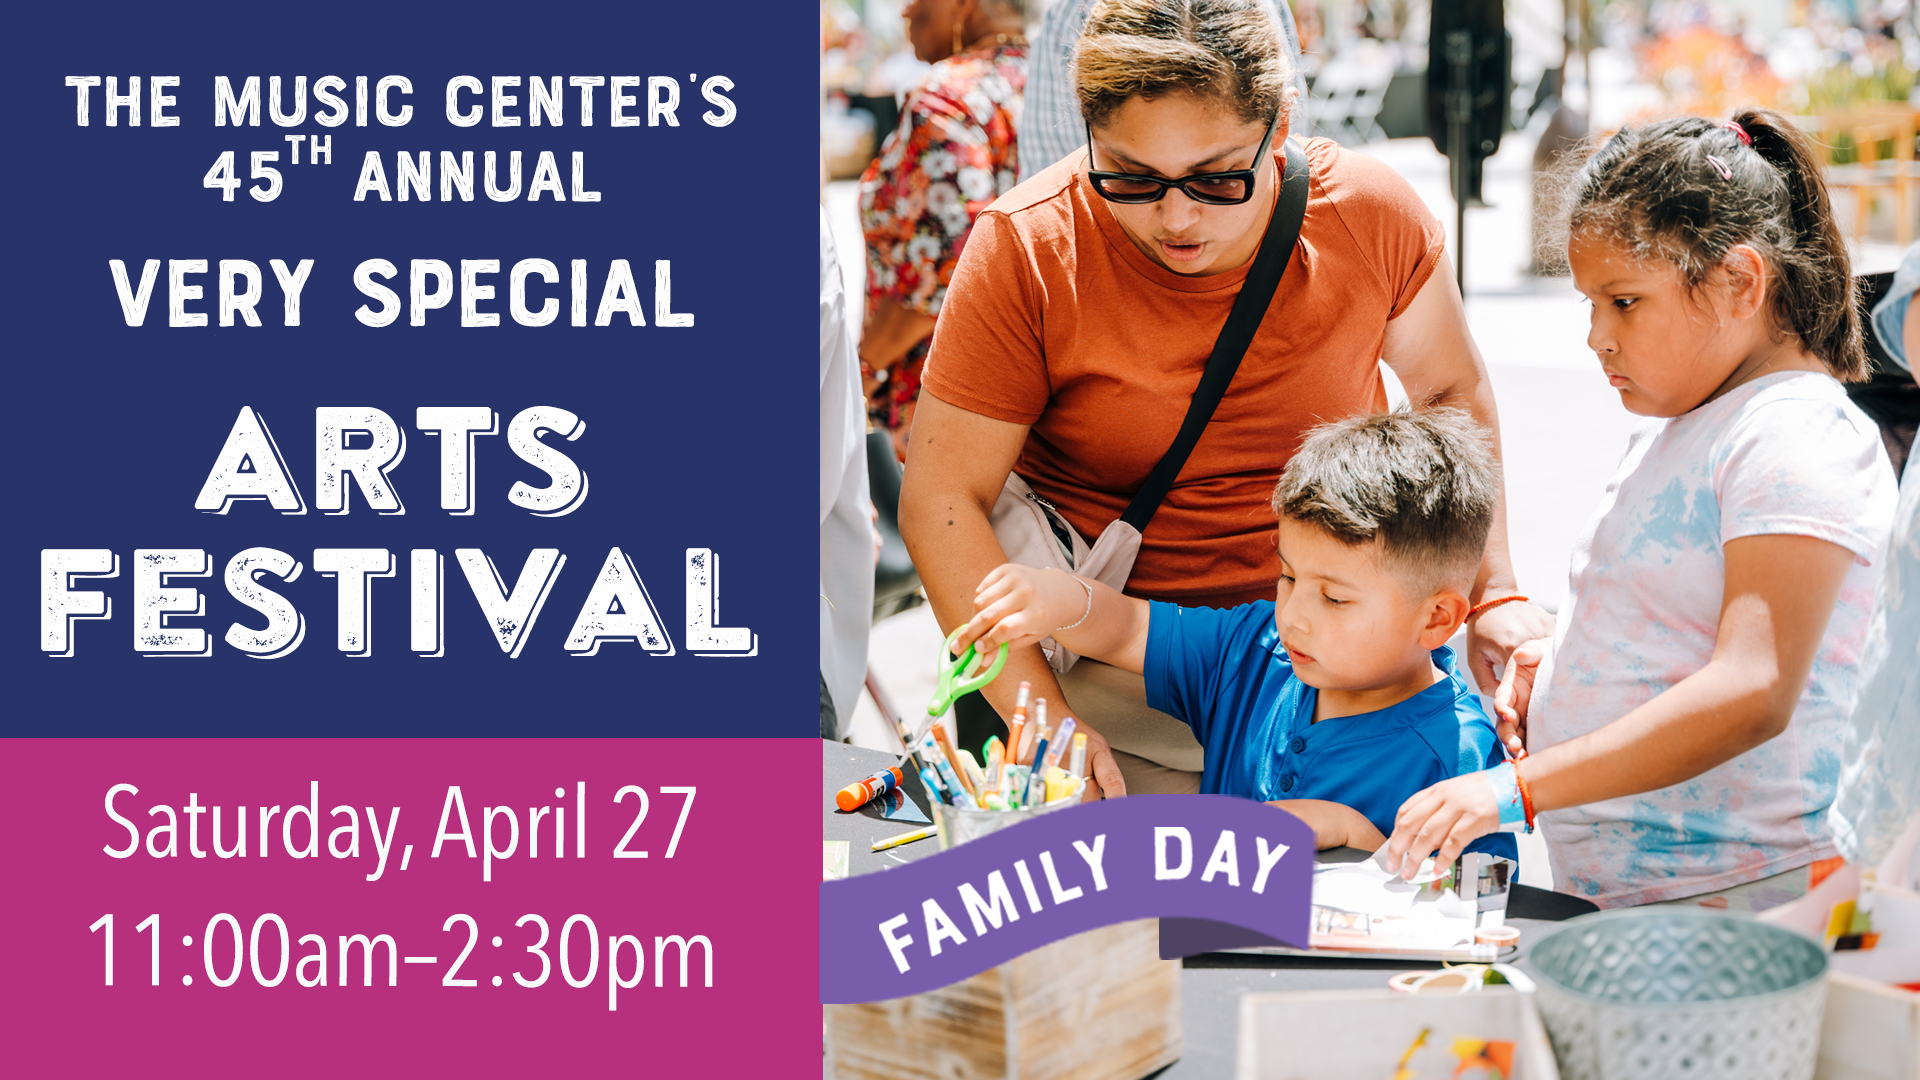 The Music Center's Very Special Arts Festival: Family Day